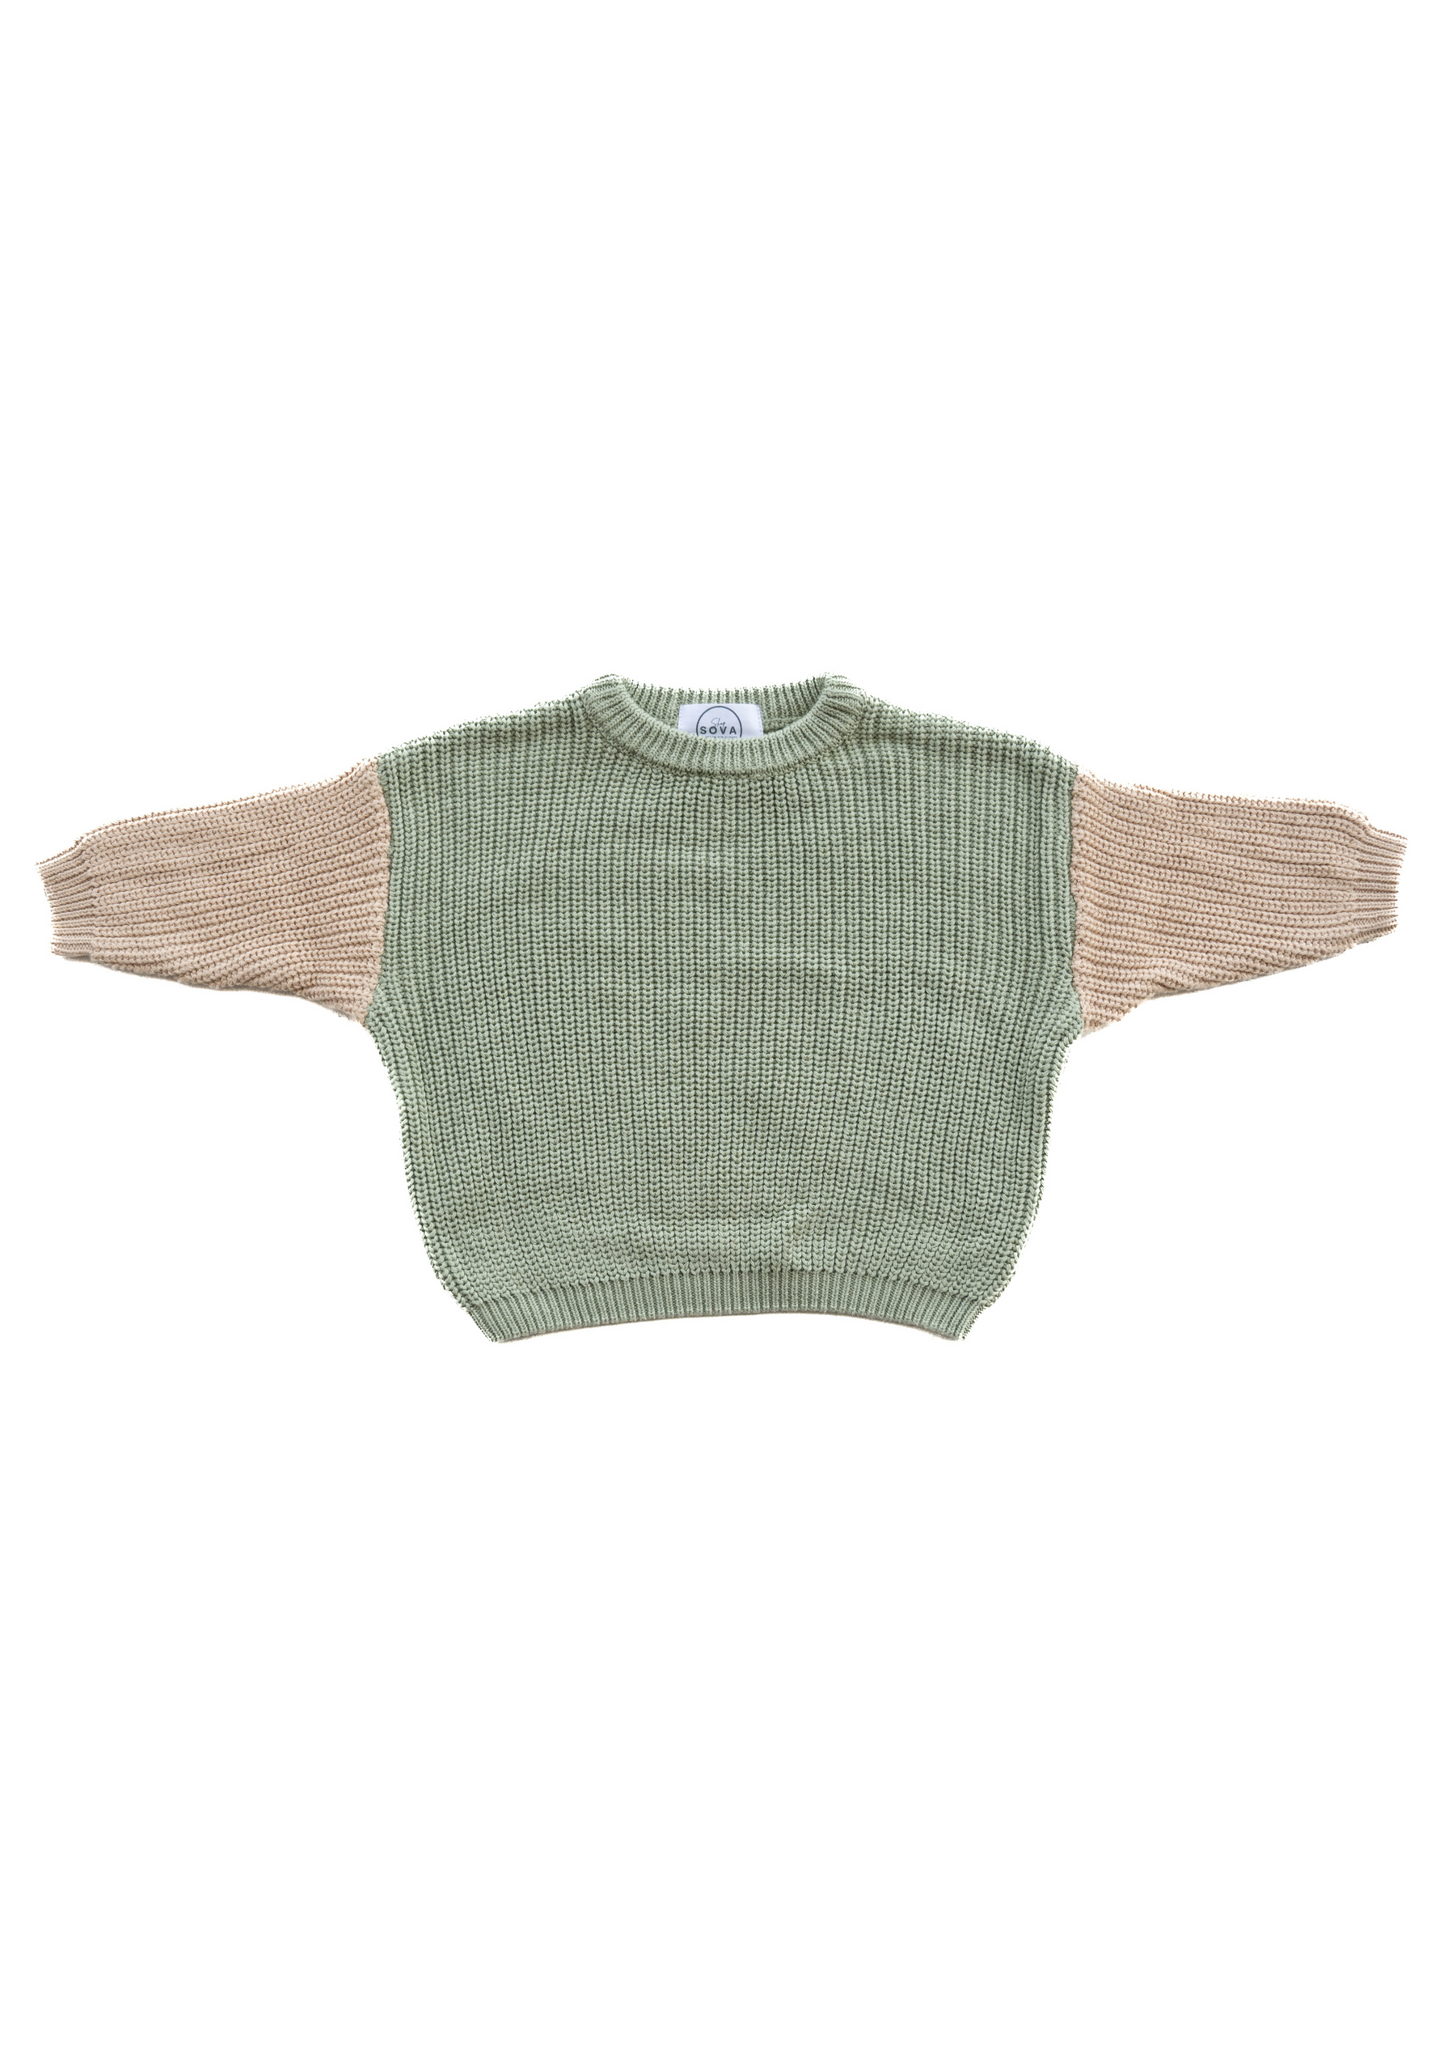 SWEATER IN MOSS AND CREAM